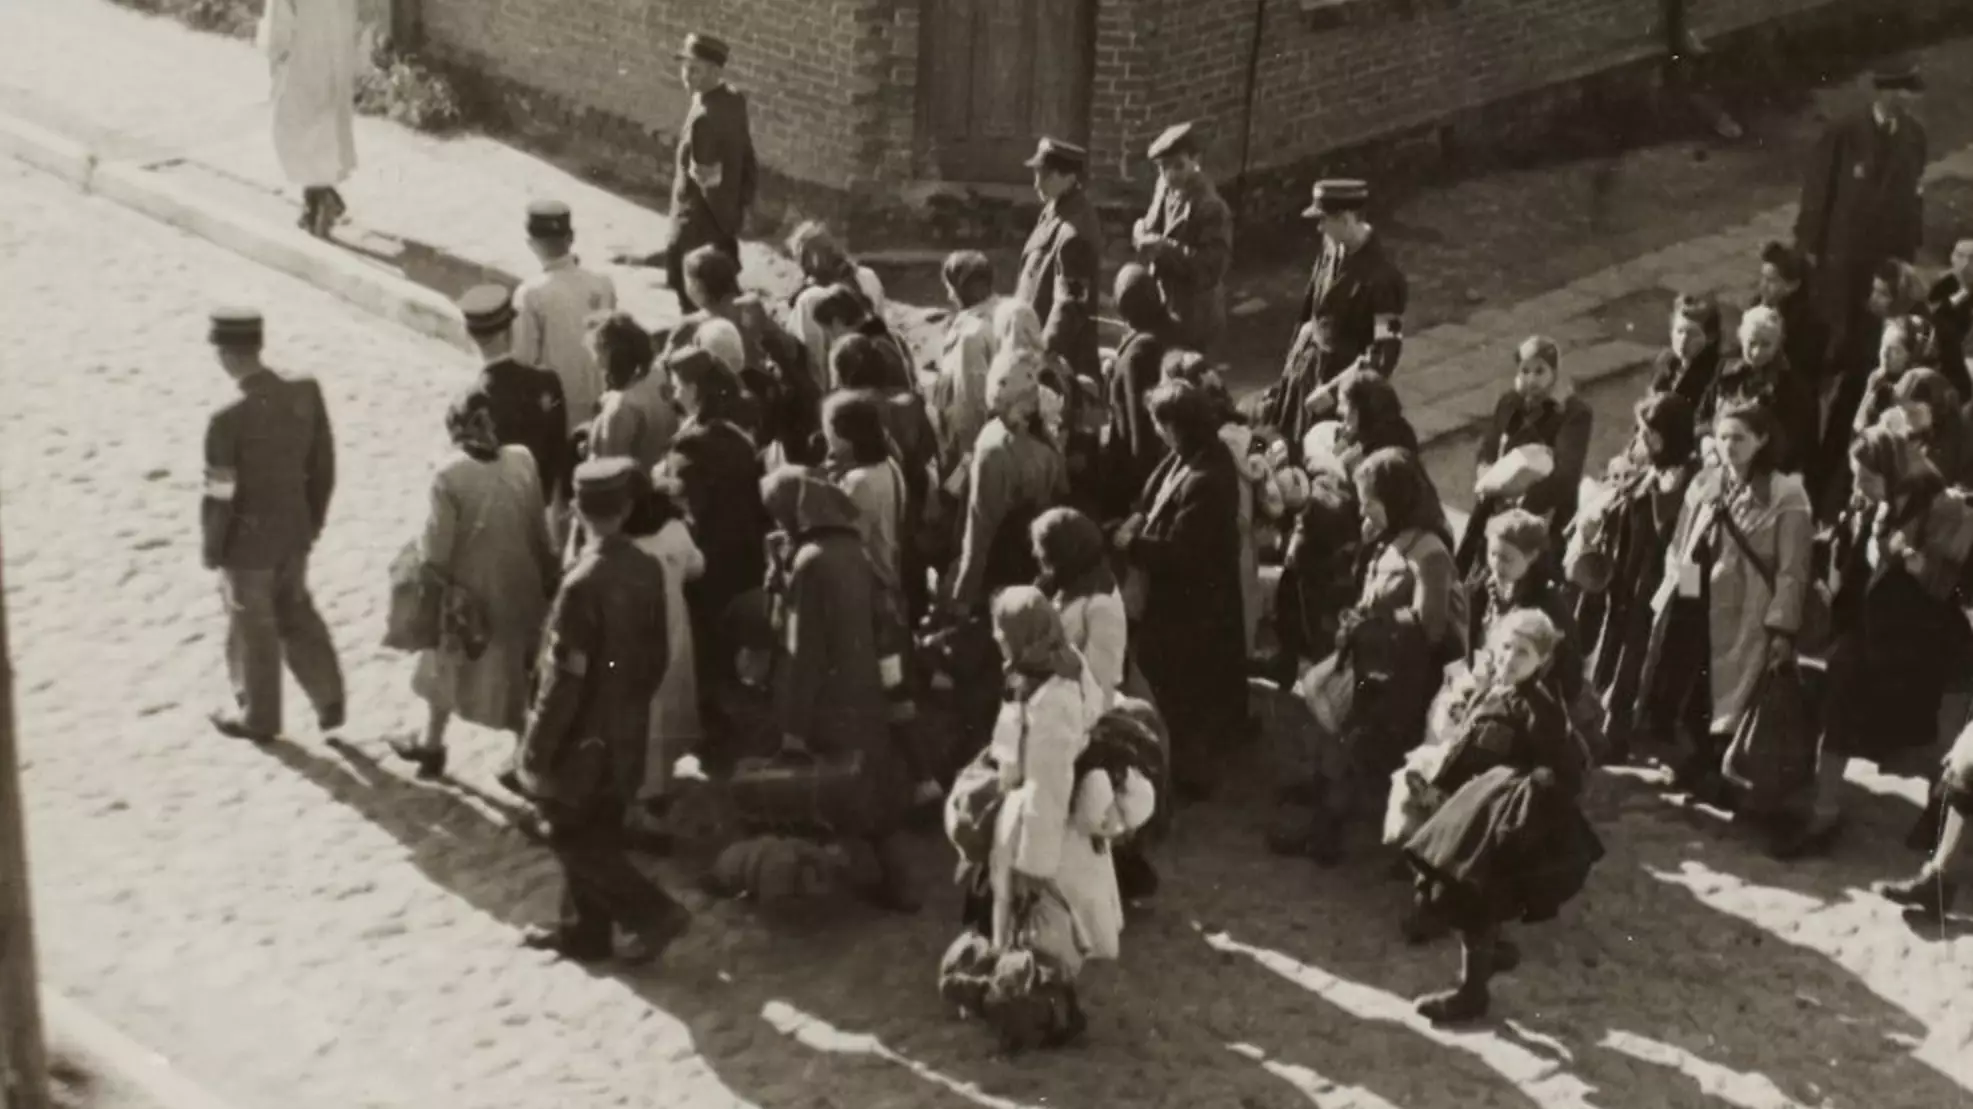 These Buried Photographs Reveal Life In A WWII Jewish Ghetto